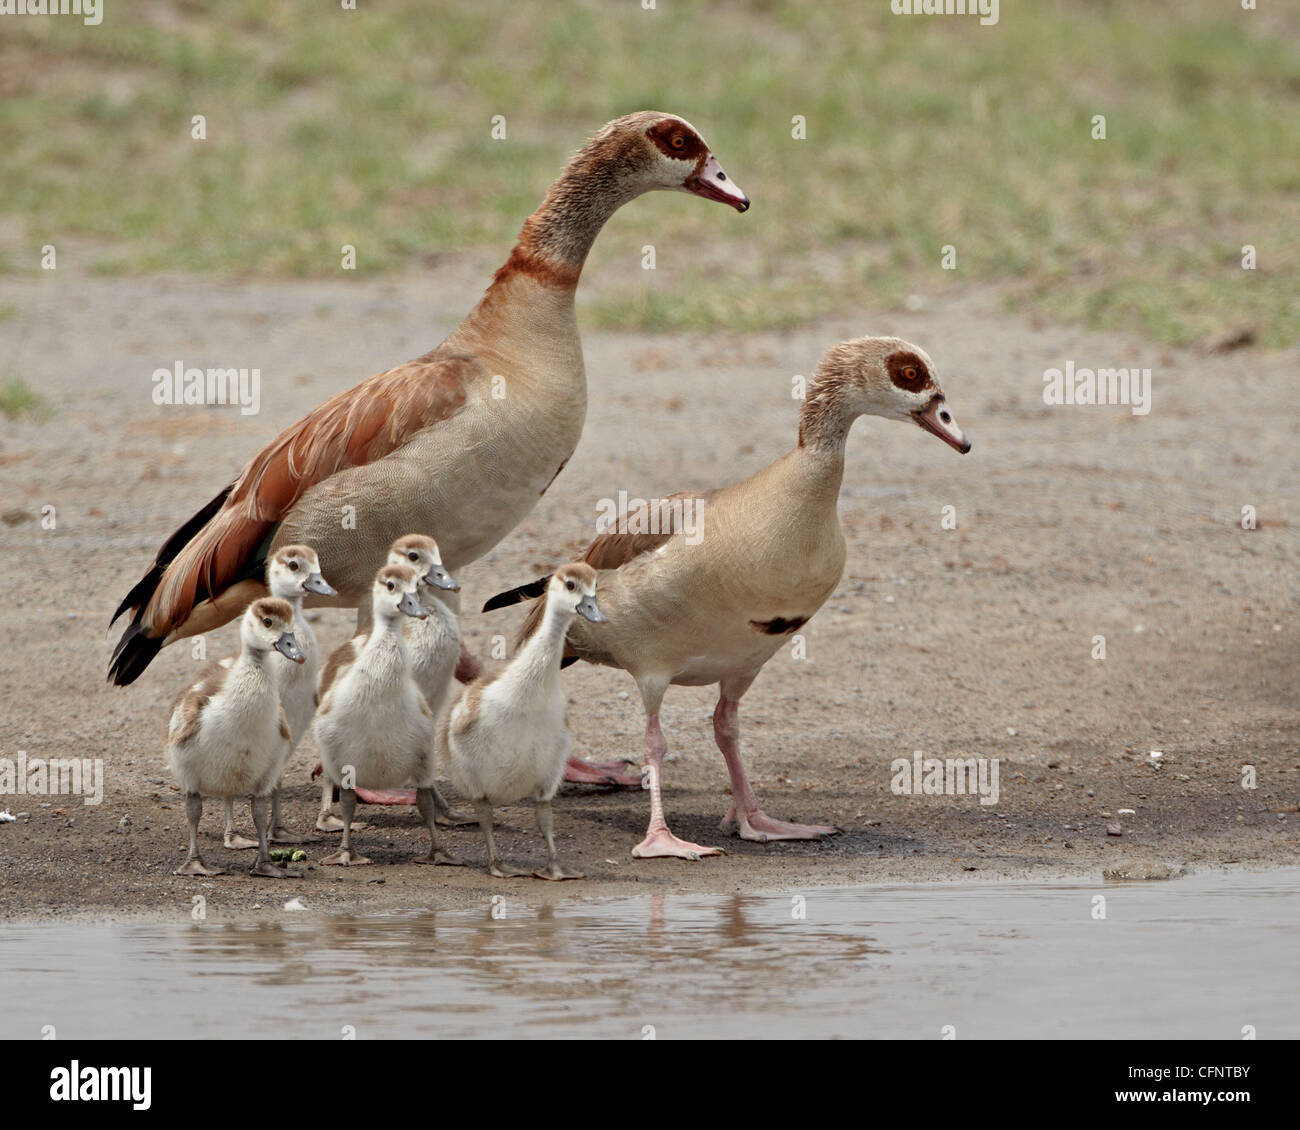 Egyptian goose (Alopochen aegyptiacus) adults and chicks, Serengeti National Park, Tanzania, East Africa, Africa Stock Photo